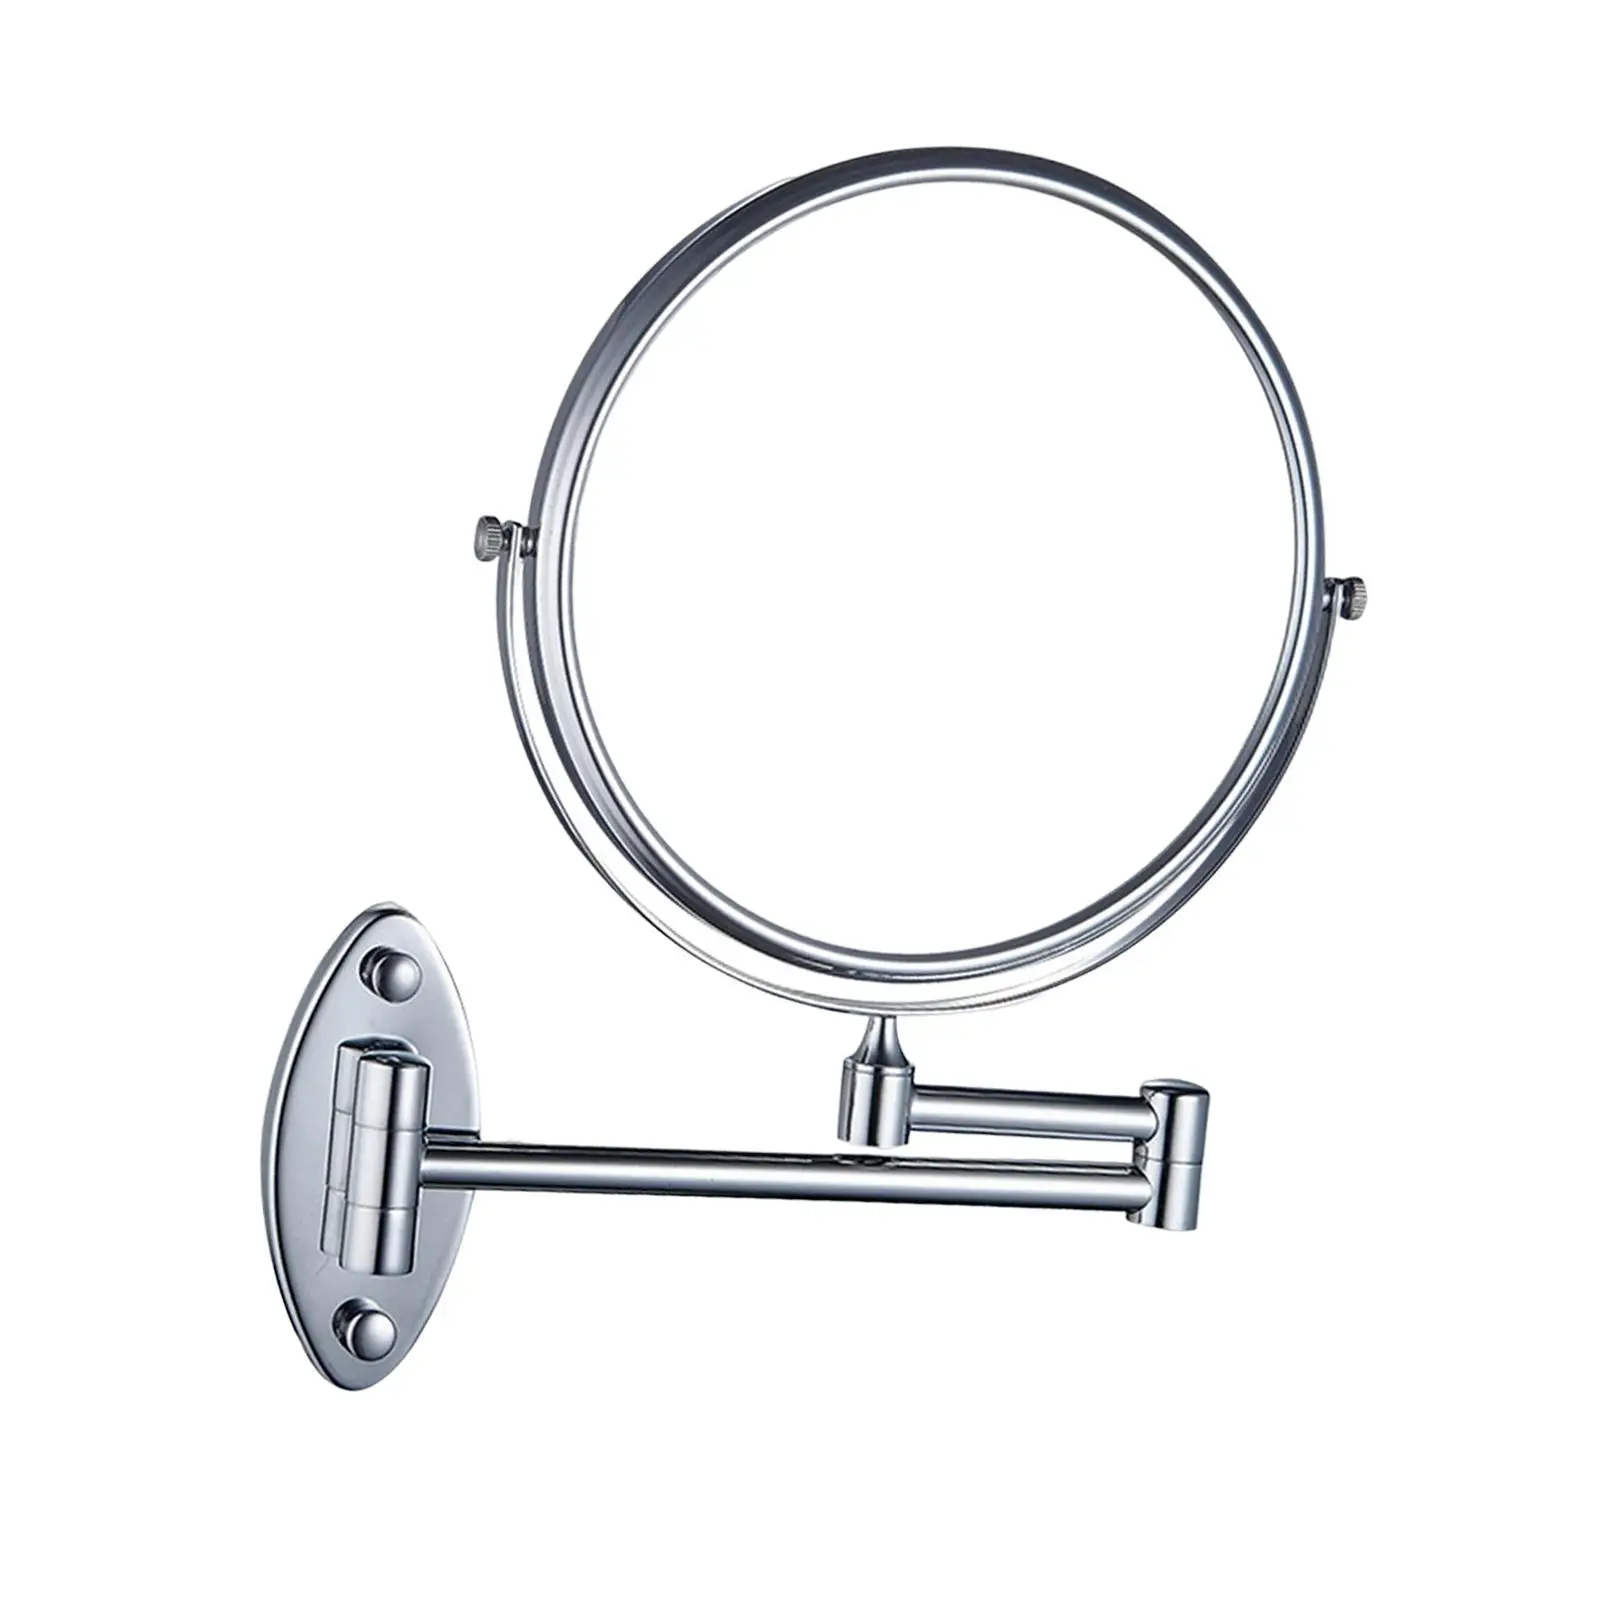 8 Inches Wall Mount Vanity Mirror Double Sided Anti Fog Chrome Rotating Round Shaving Mirrors for Bathroom Hotel Accessories